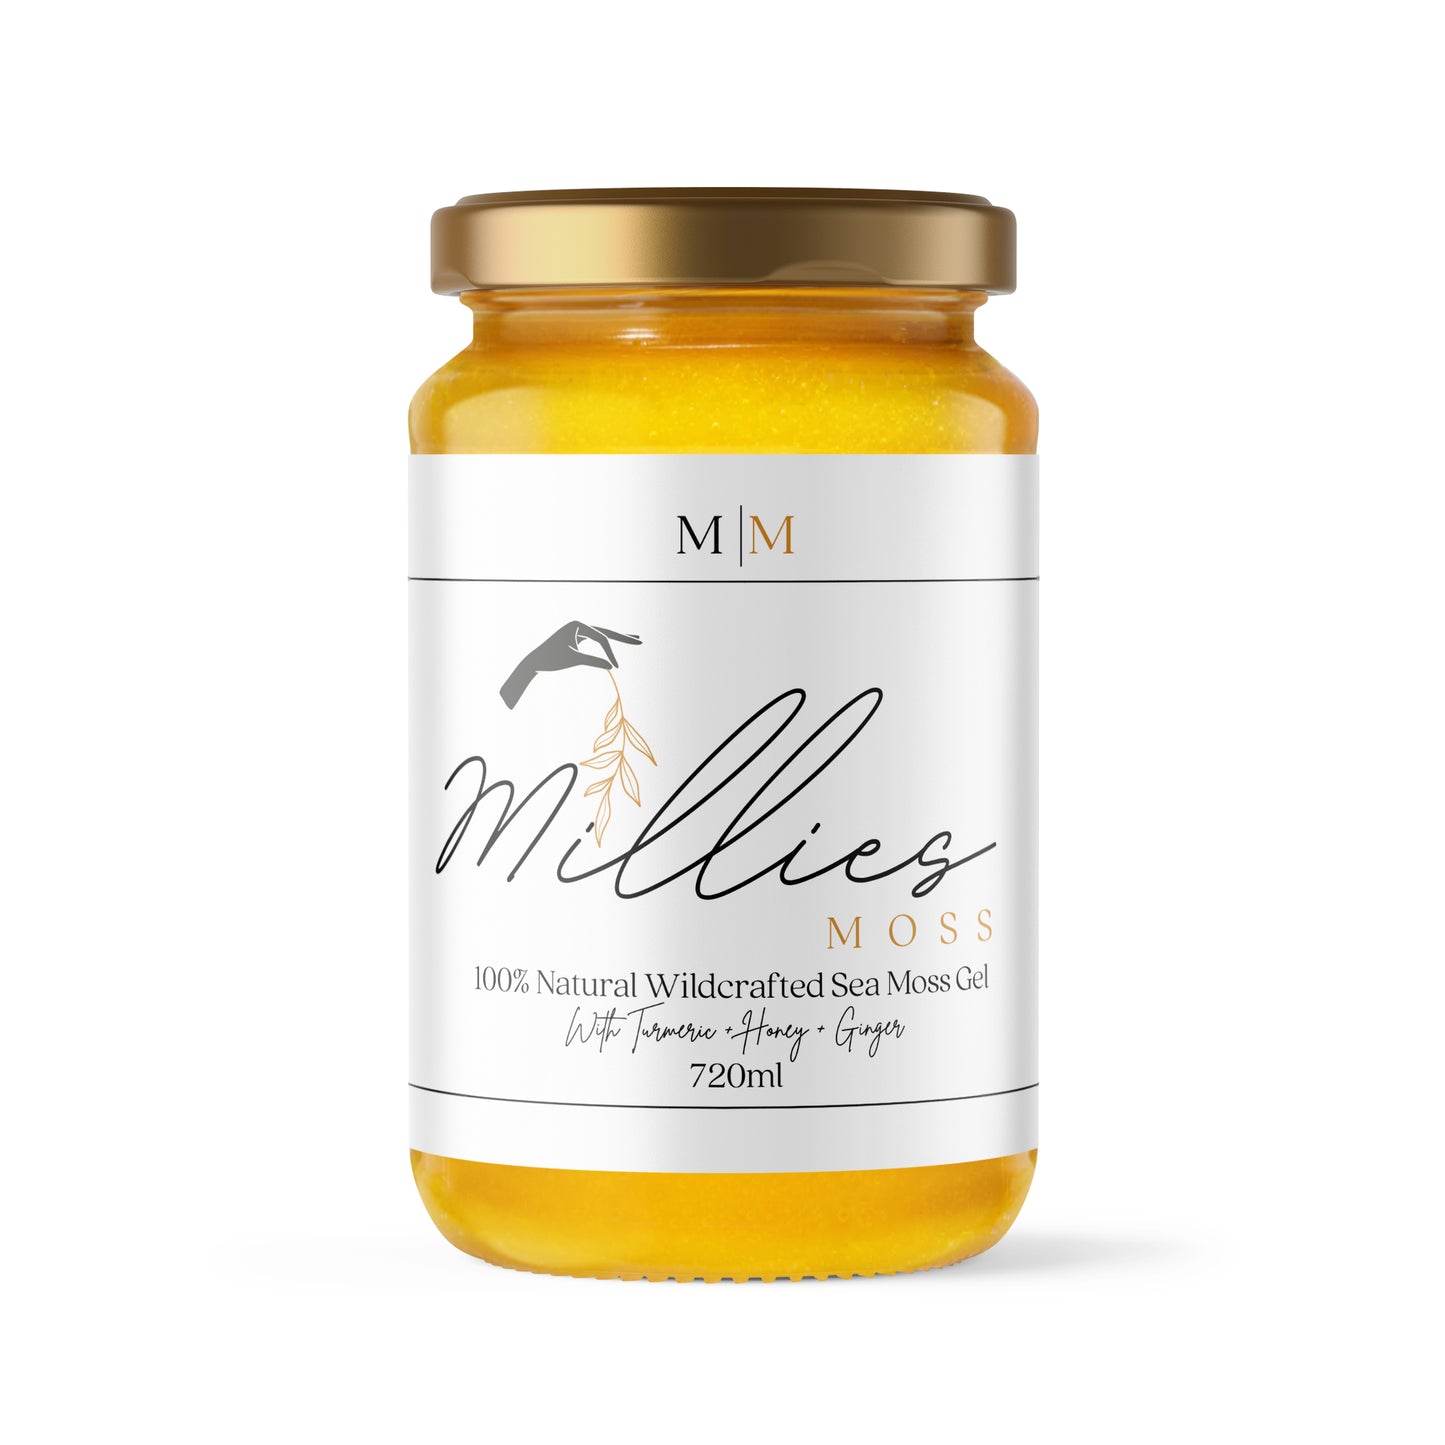 Sea Moss Gel Infused With Turmeric, Manuka Honey & Ginger - Millie's Moss